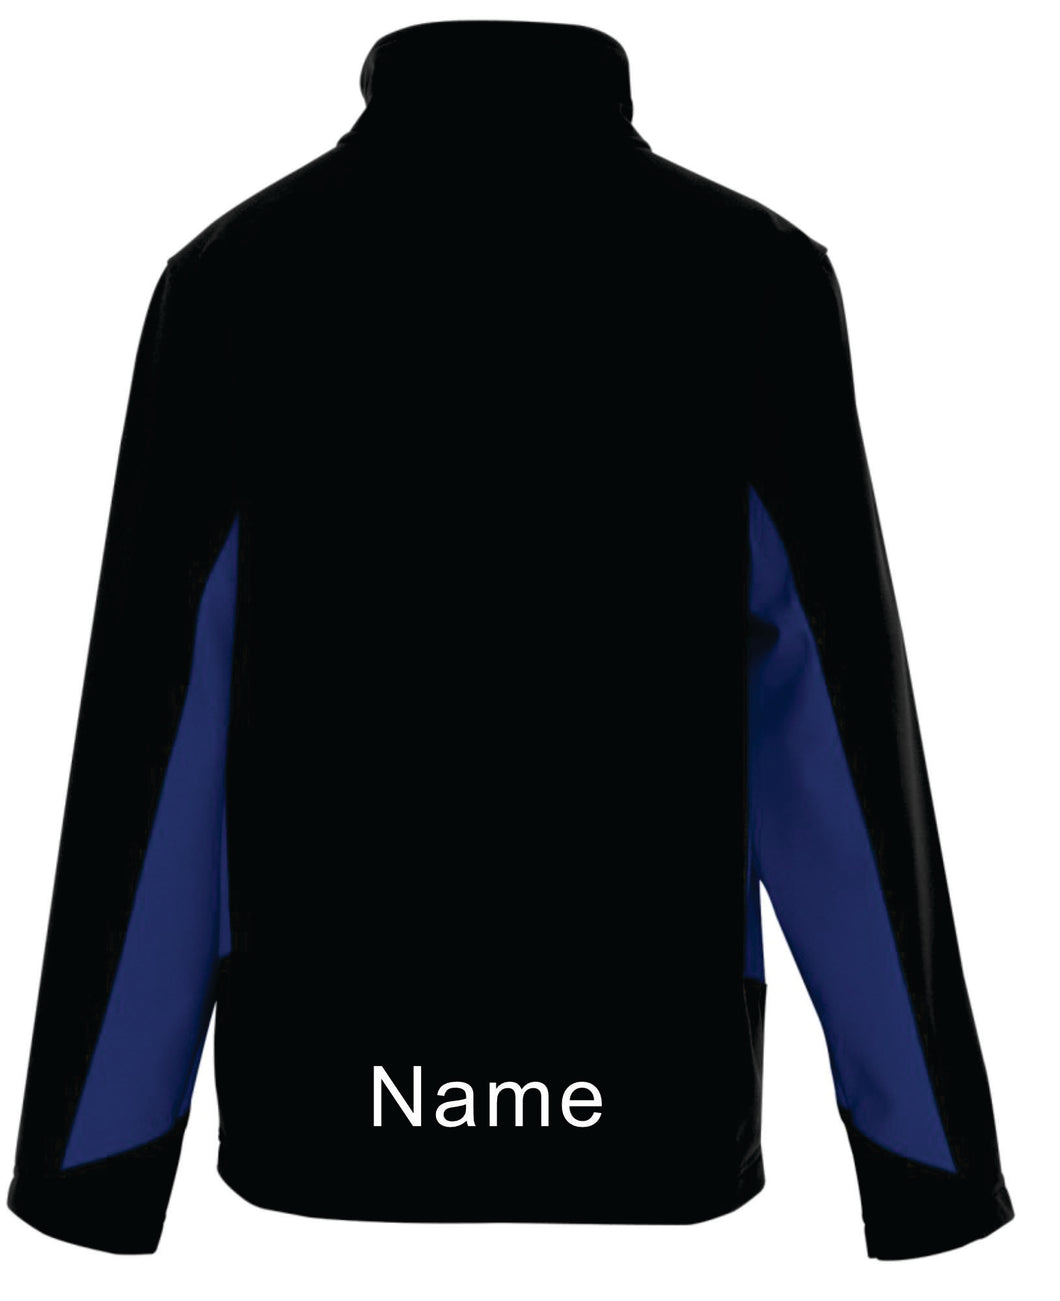 COAL HARBOUR® EVERYDAY COLOUR BLOCK SOFT SHELL JACKET. J7604 WITH NAME ON BOTTOM BACK